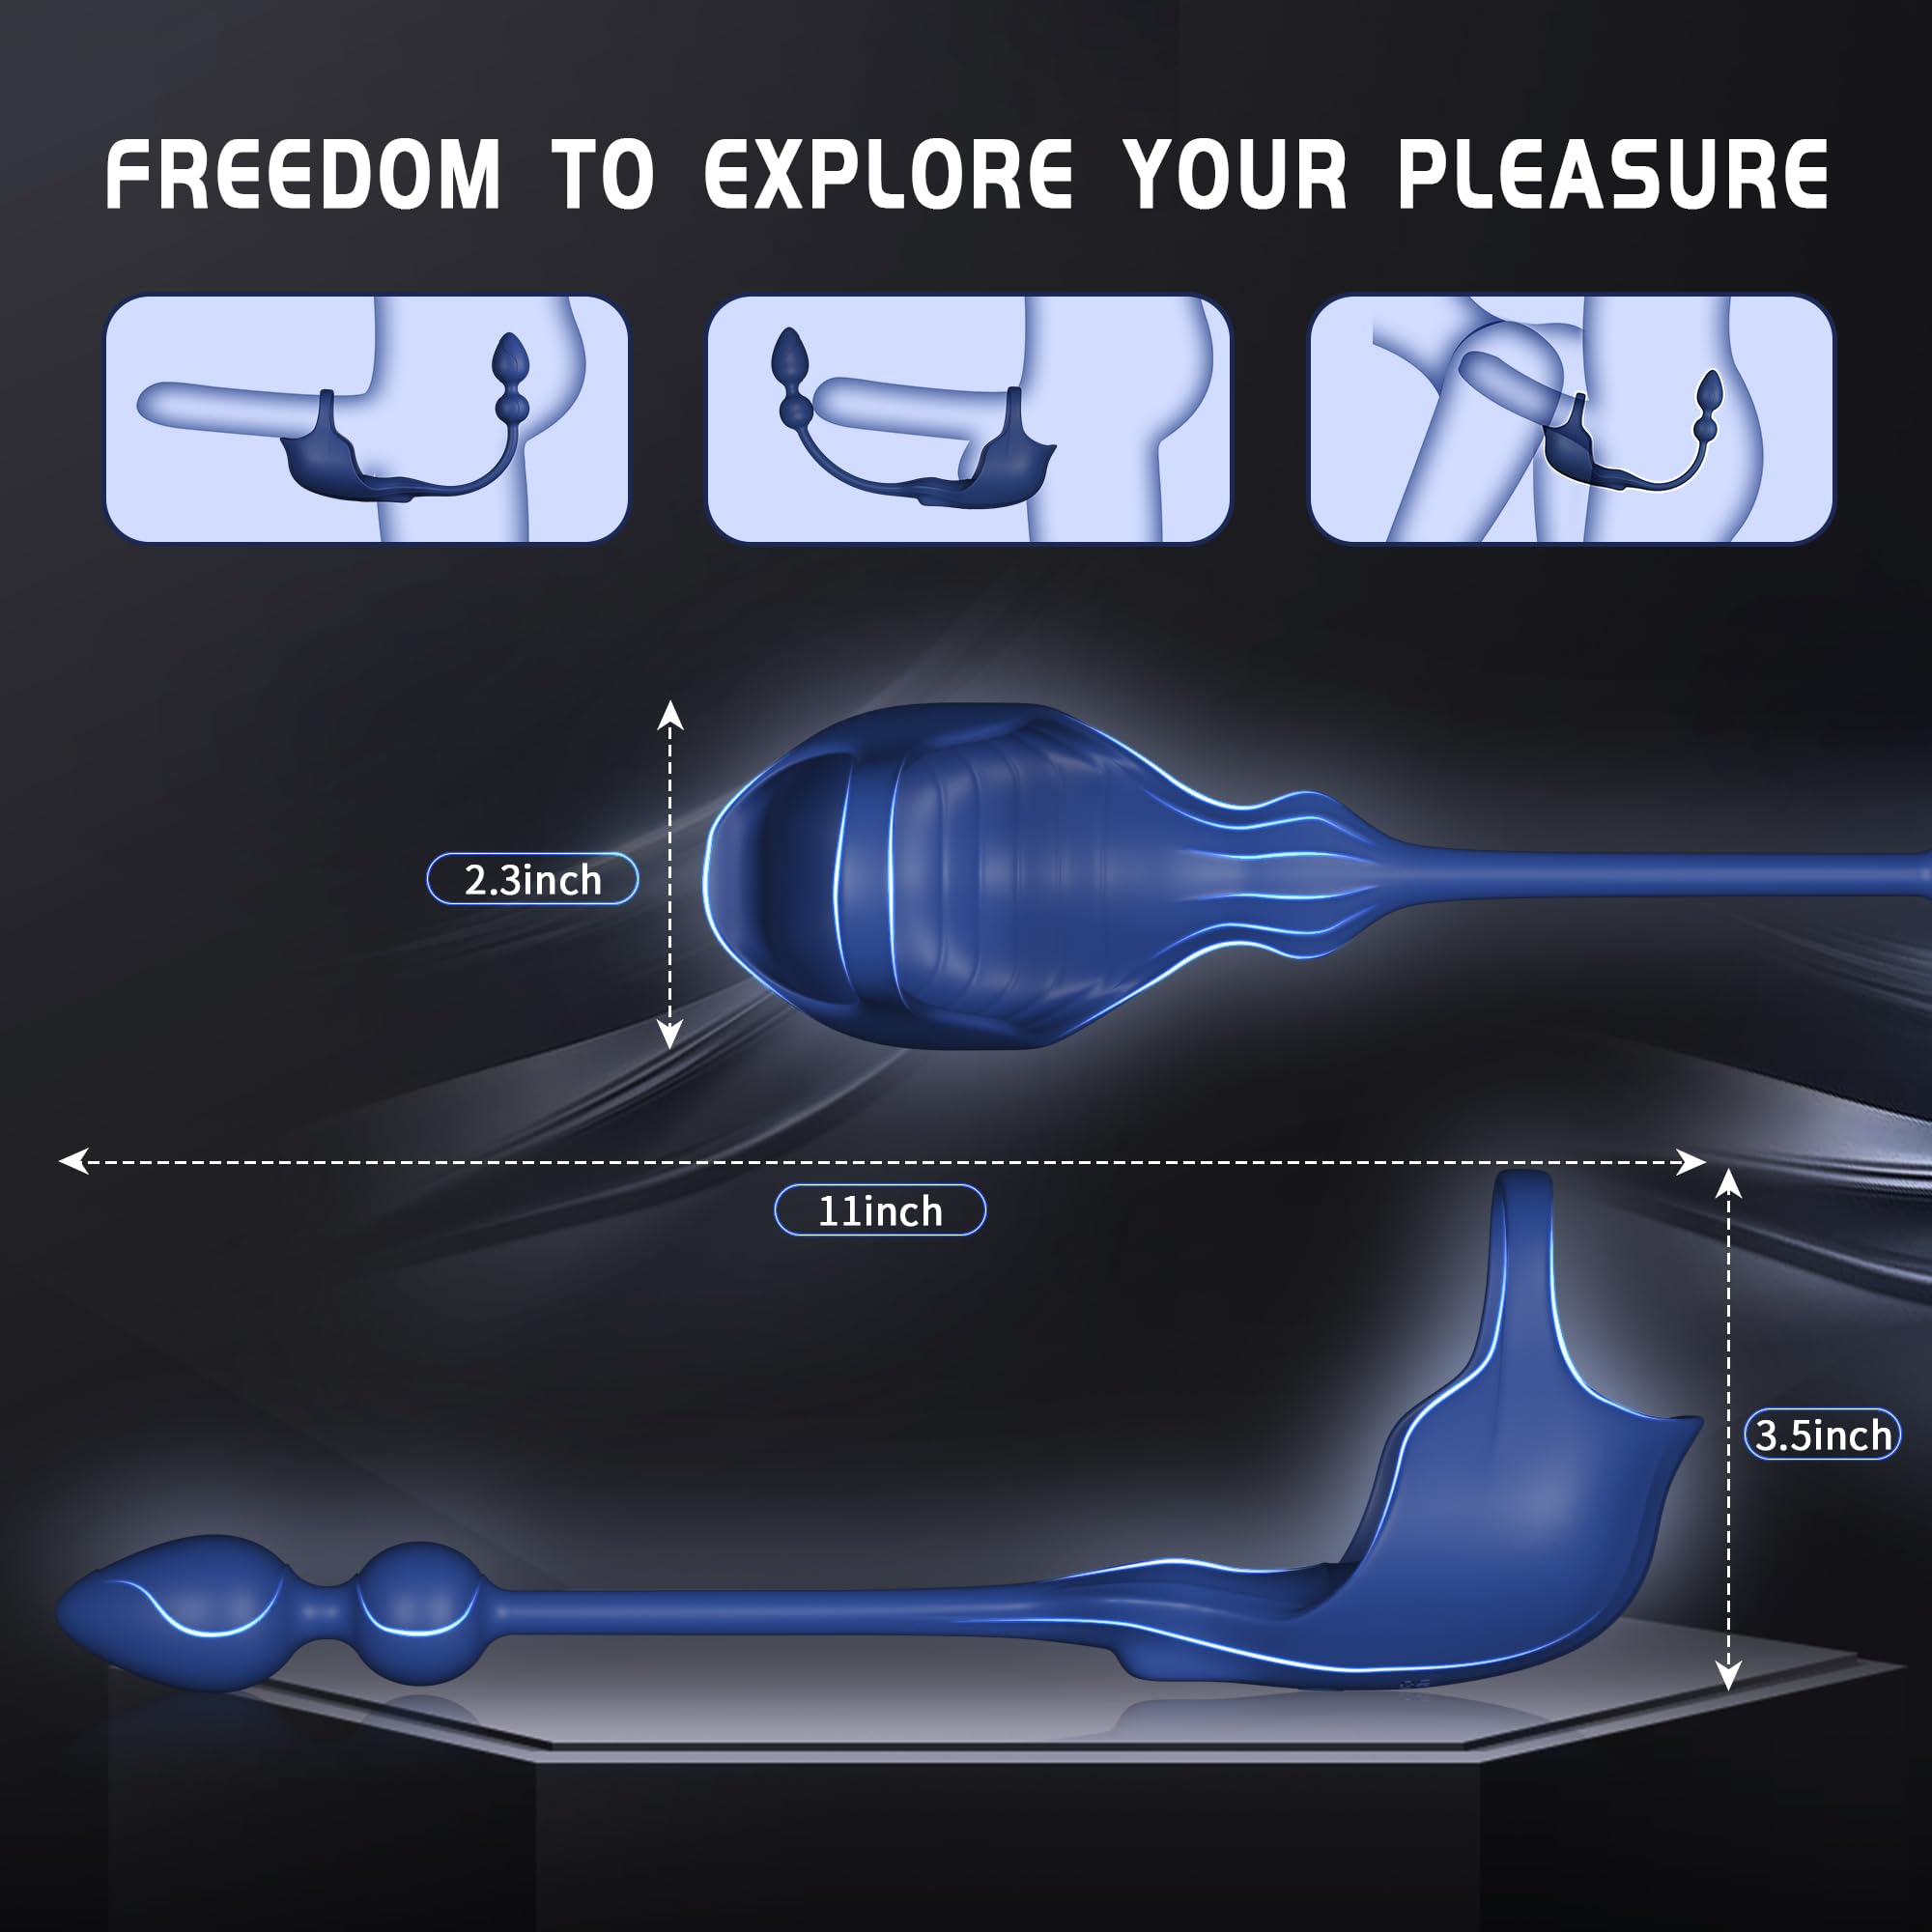 Manta Fourfold Pleasure APP Controlled Anal Vibrator with Cock Ring